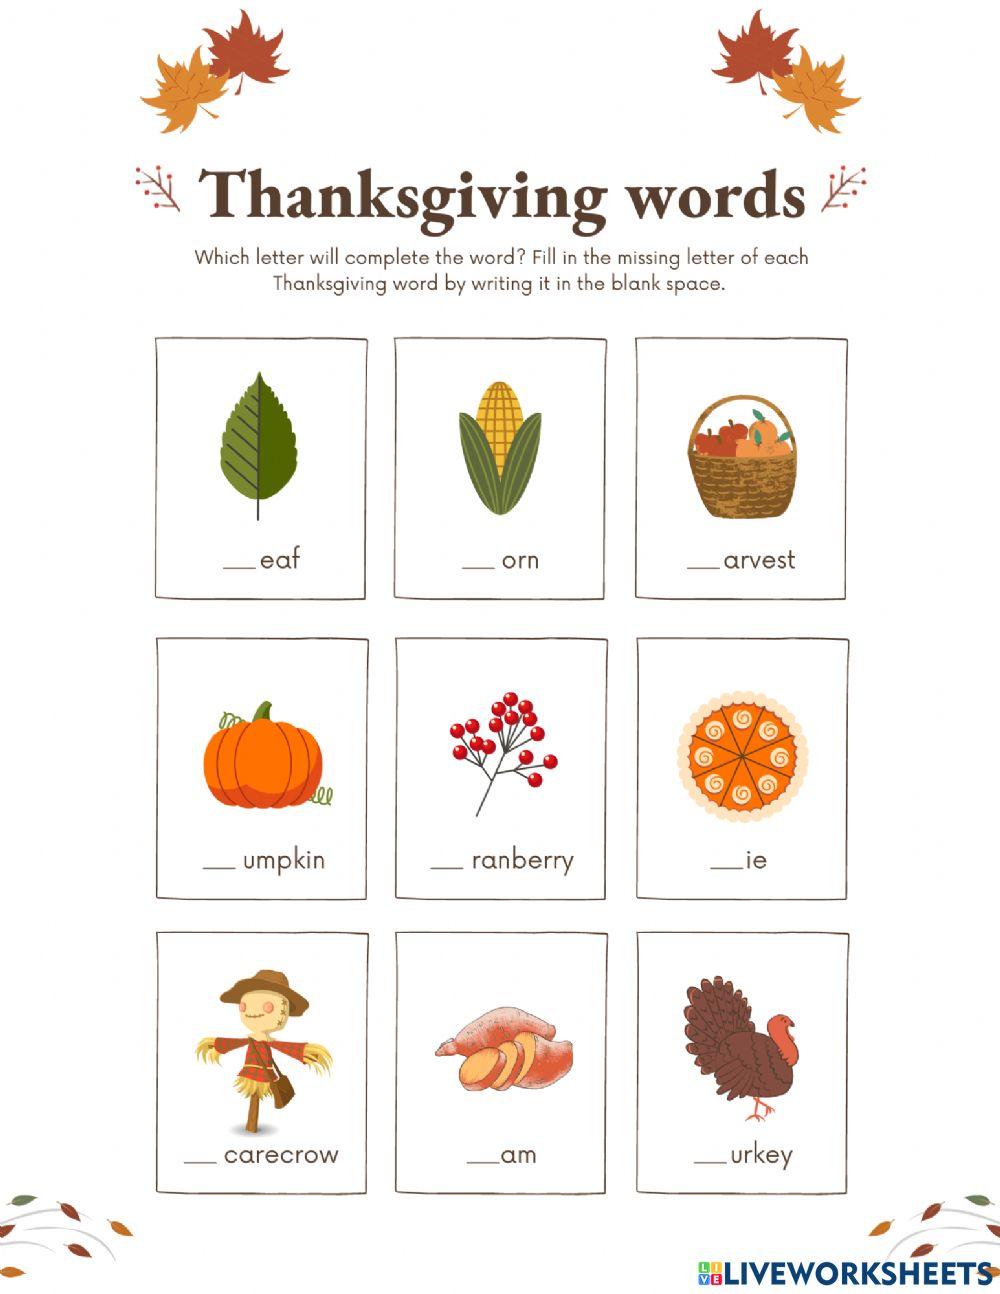 Thanksgiving Words